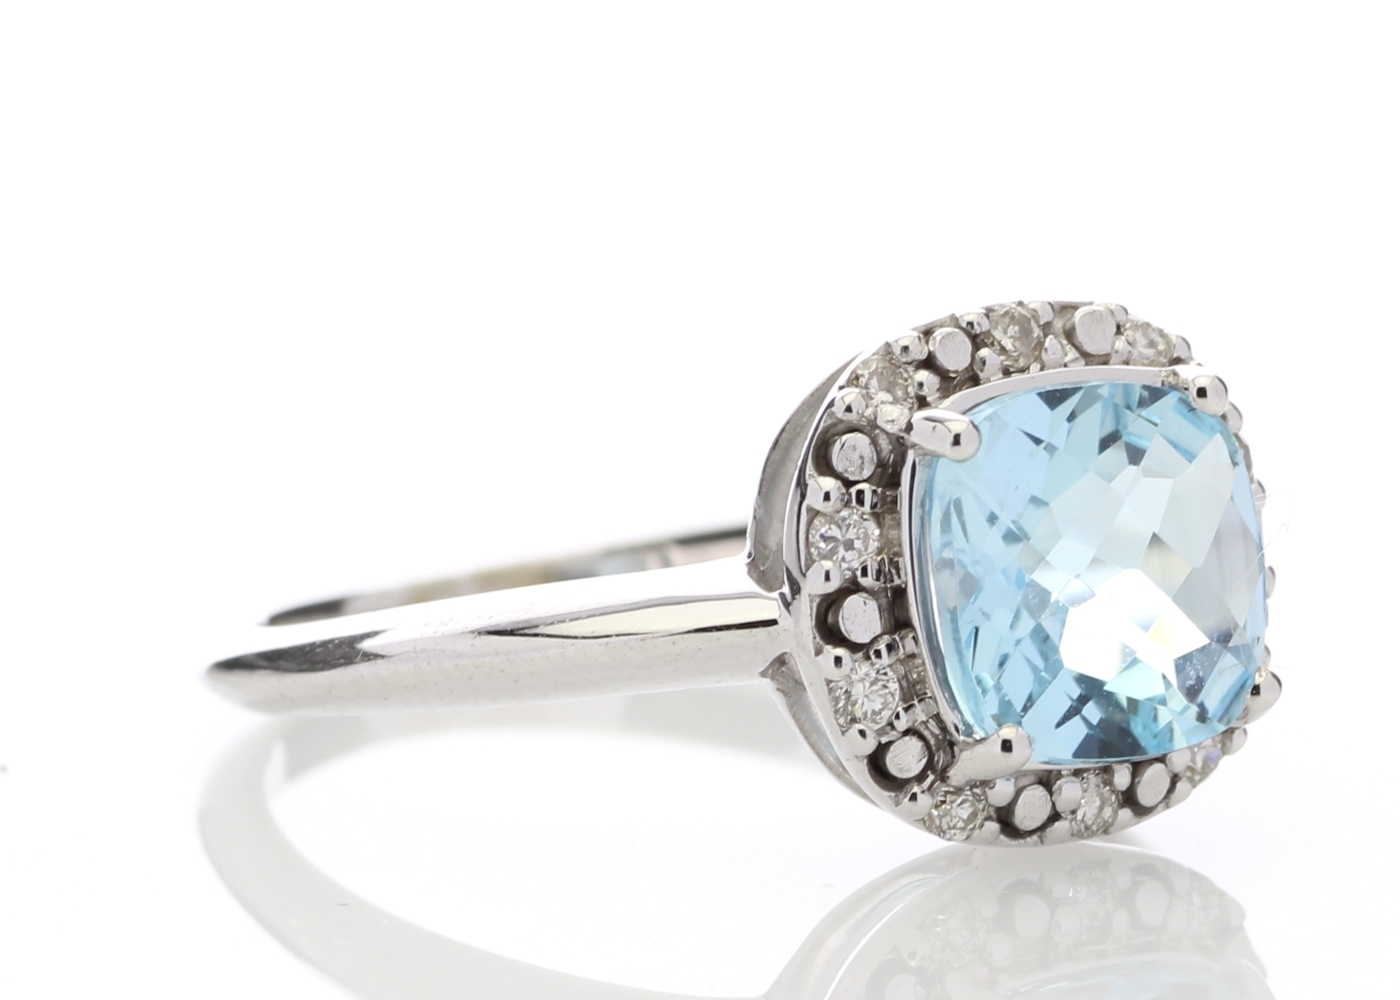 9ct White Gold Diamond And Blue Topaz Ring (BT1.79) 0.10 Carats - Valued By GIE £1,920.00 - A - Image 4 of 10